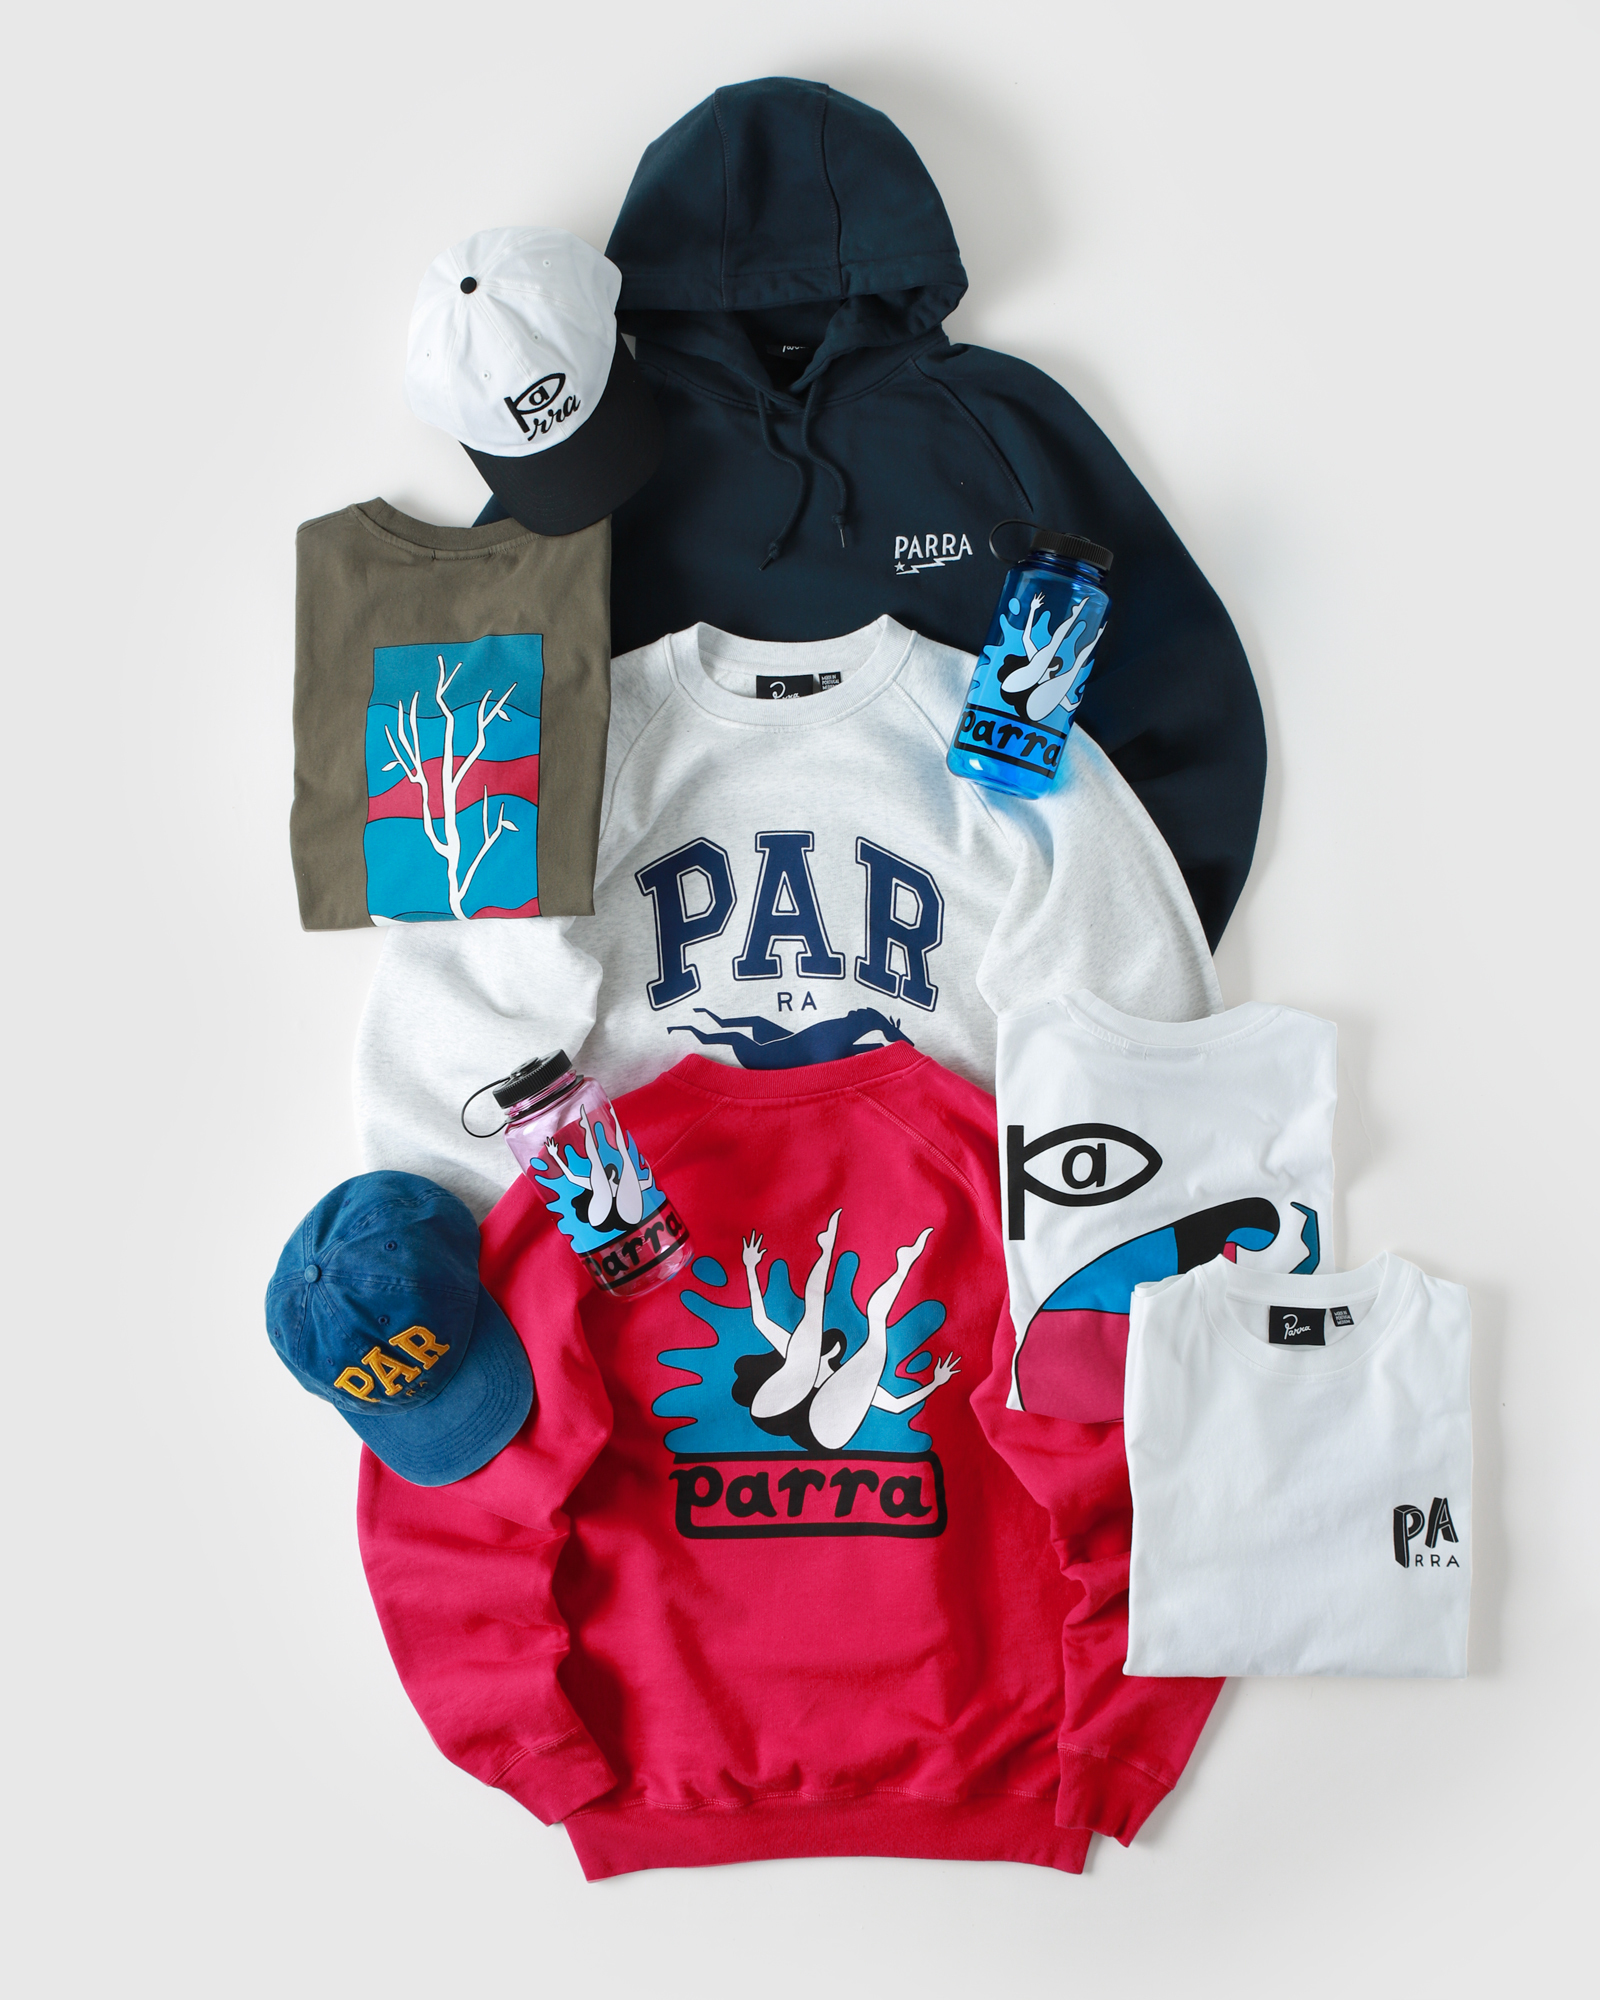  Don’t sleep: By Parra is here